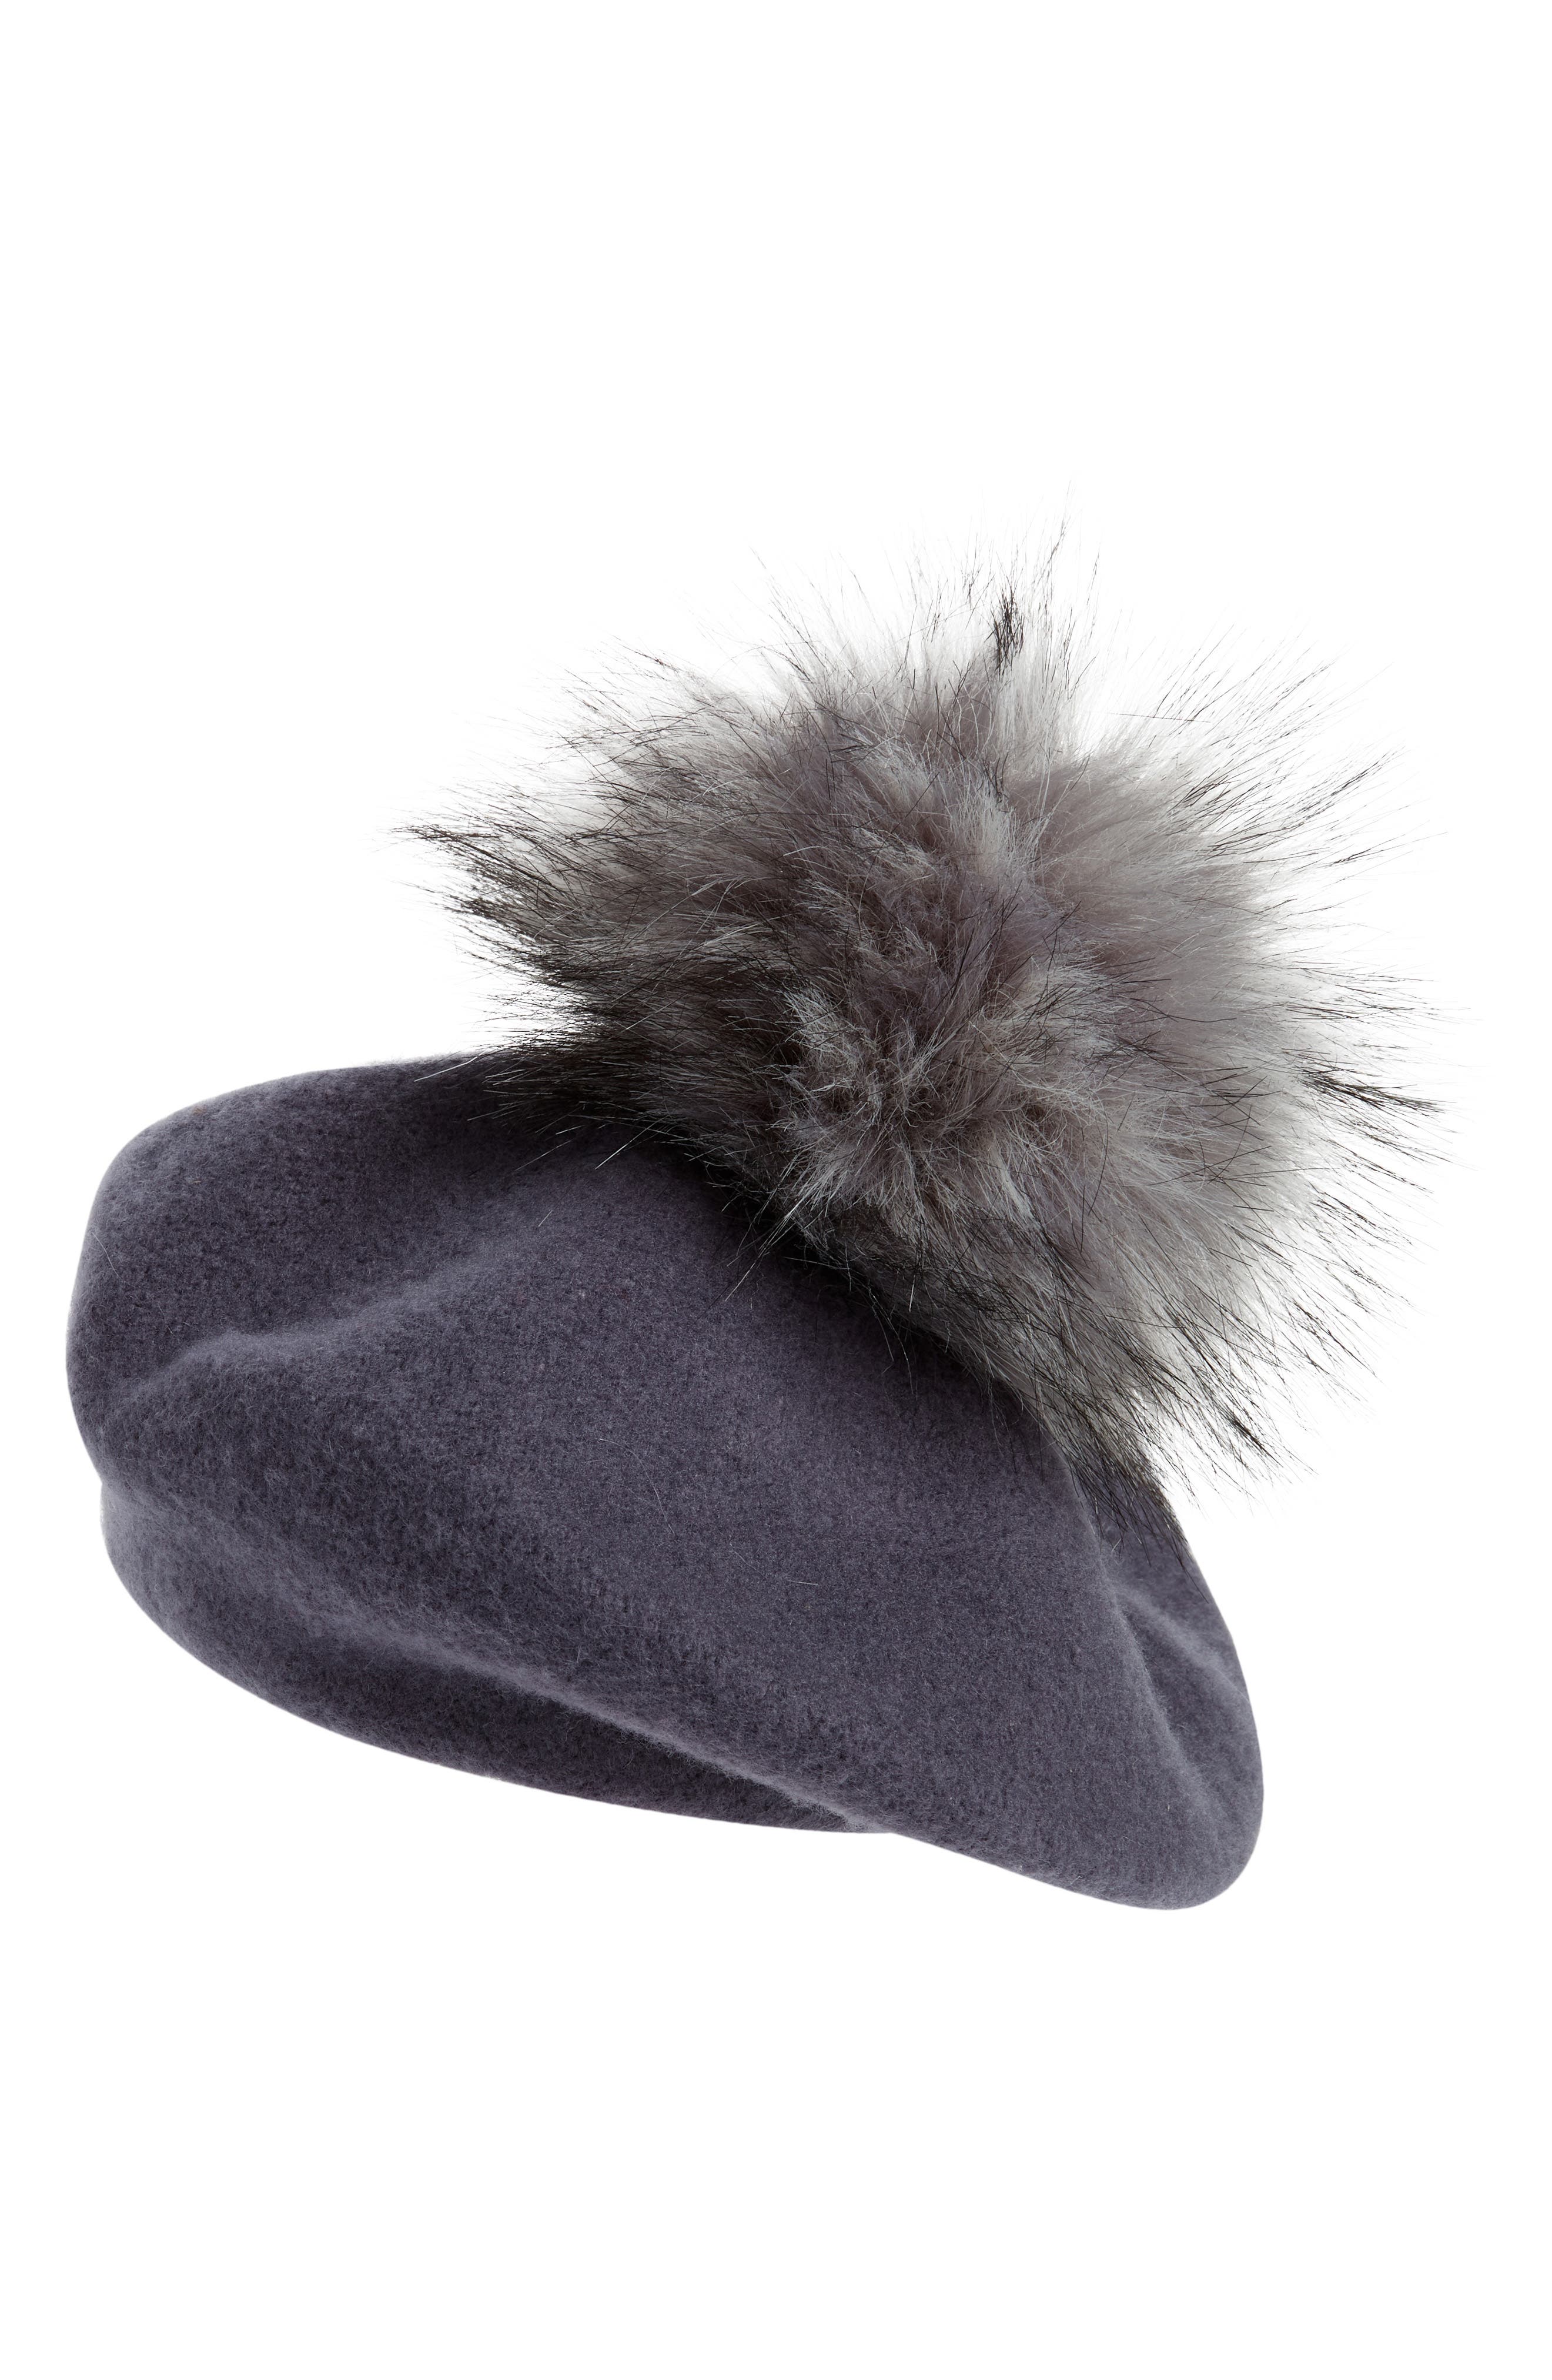 Kyi Kyi Wool Beret with Faux Fur Pom in Black/Black at Nordstrom